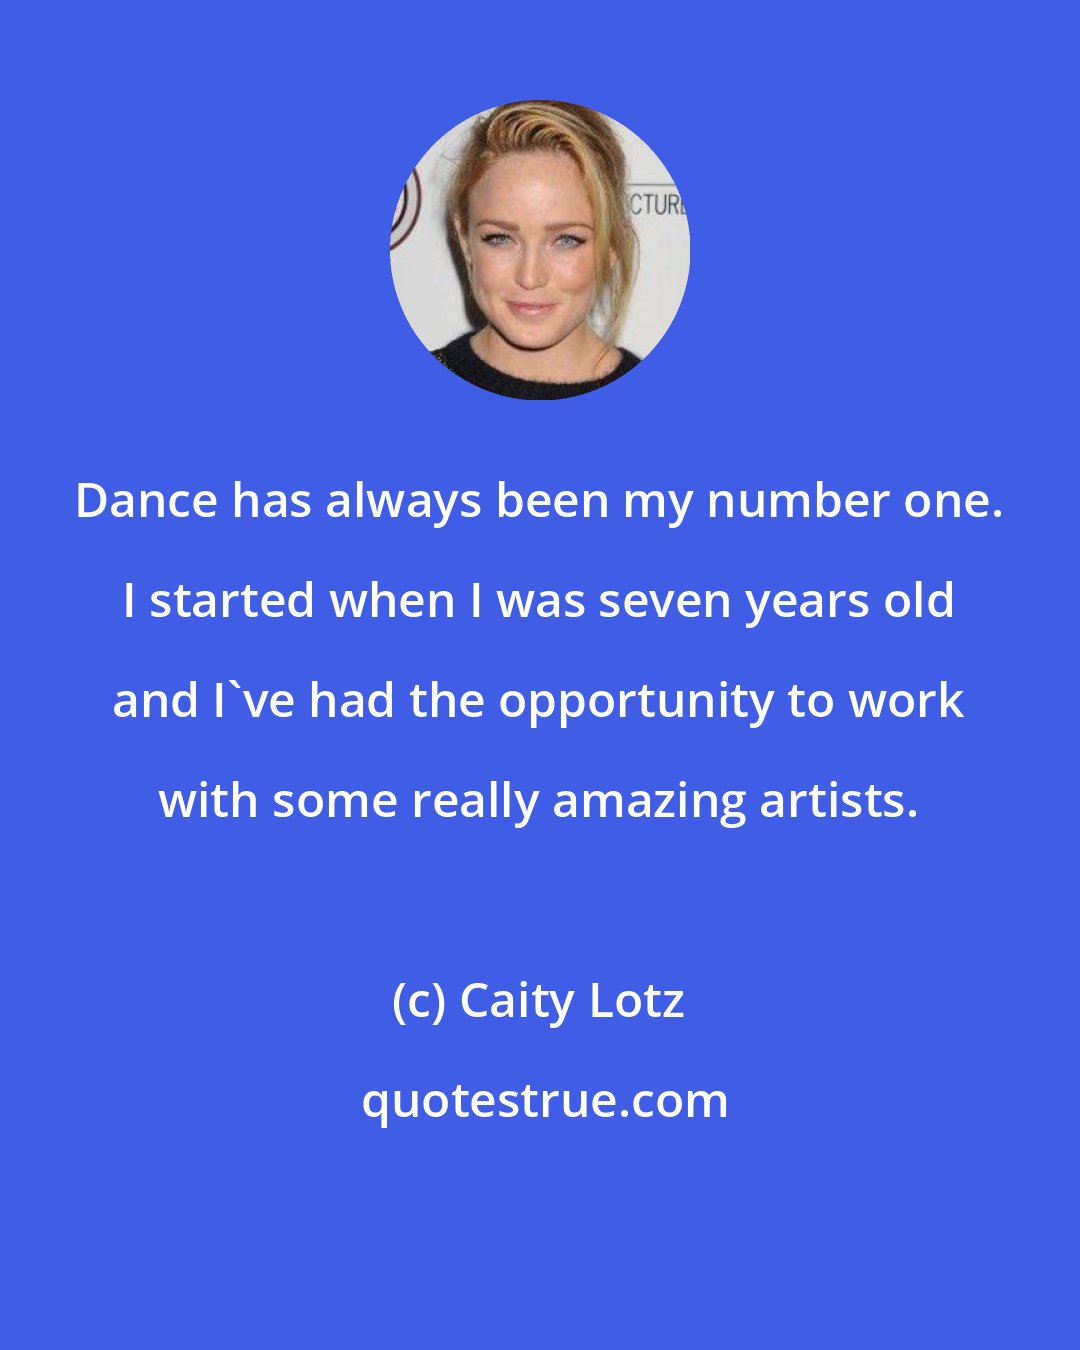 Caity Lotz: Dance has always been my number one. I started when I was seven years old and I've had the opportunity to work with some really amazing artists.